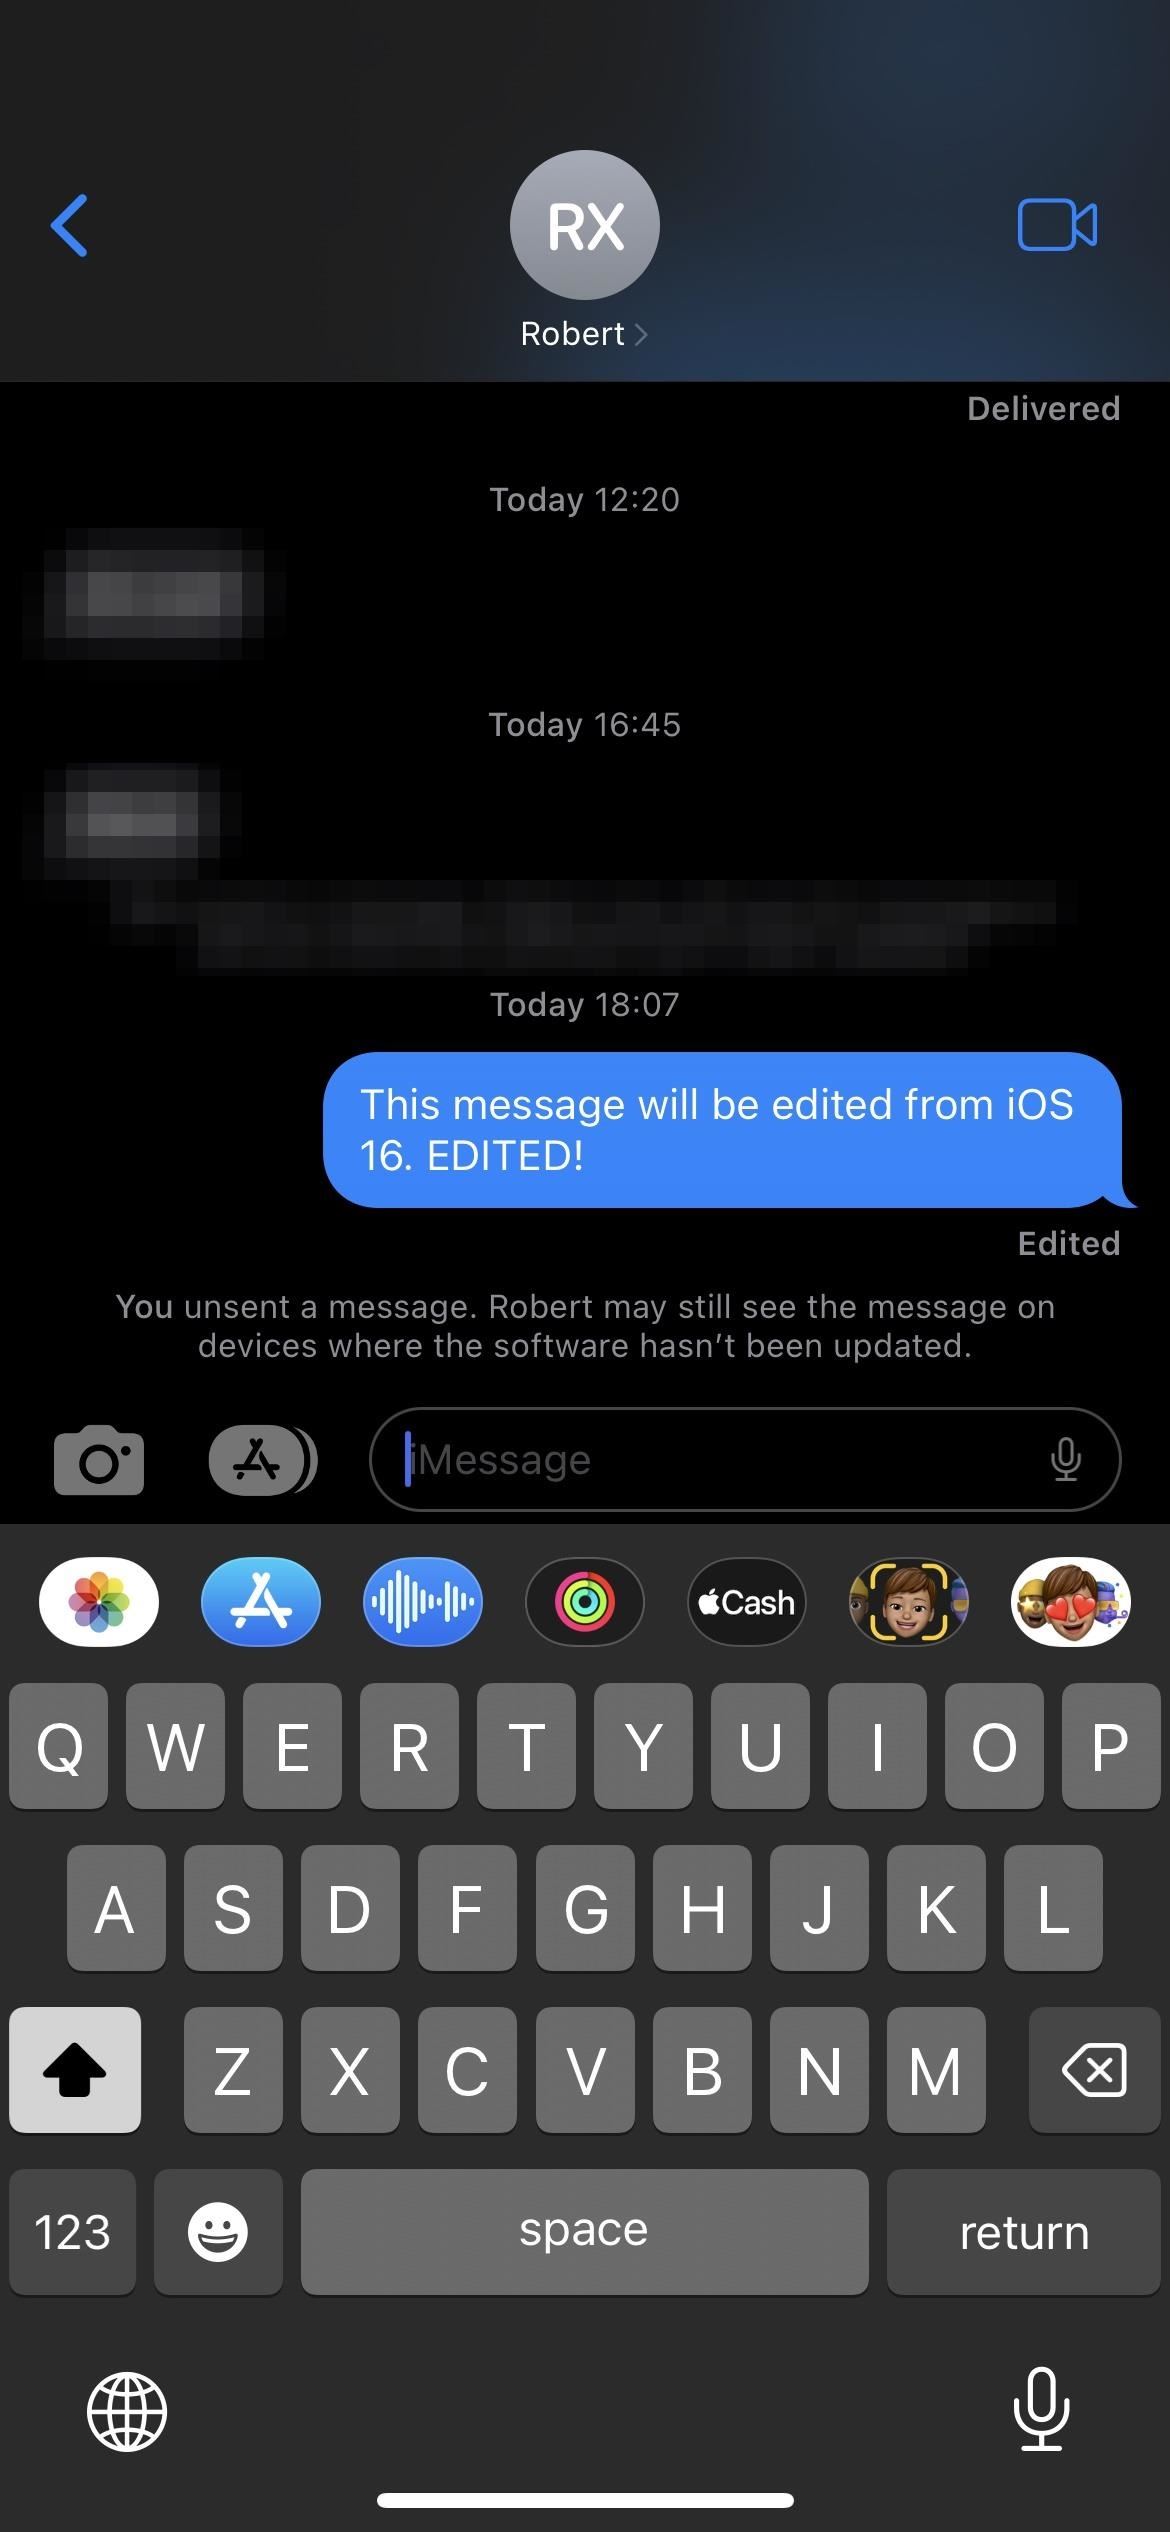 There's an Easy Way to See All the Unsent Messages in Your iMessage Conversations